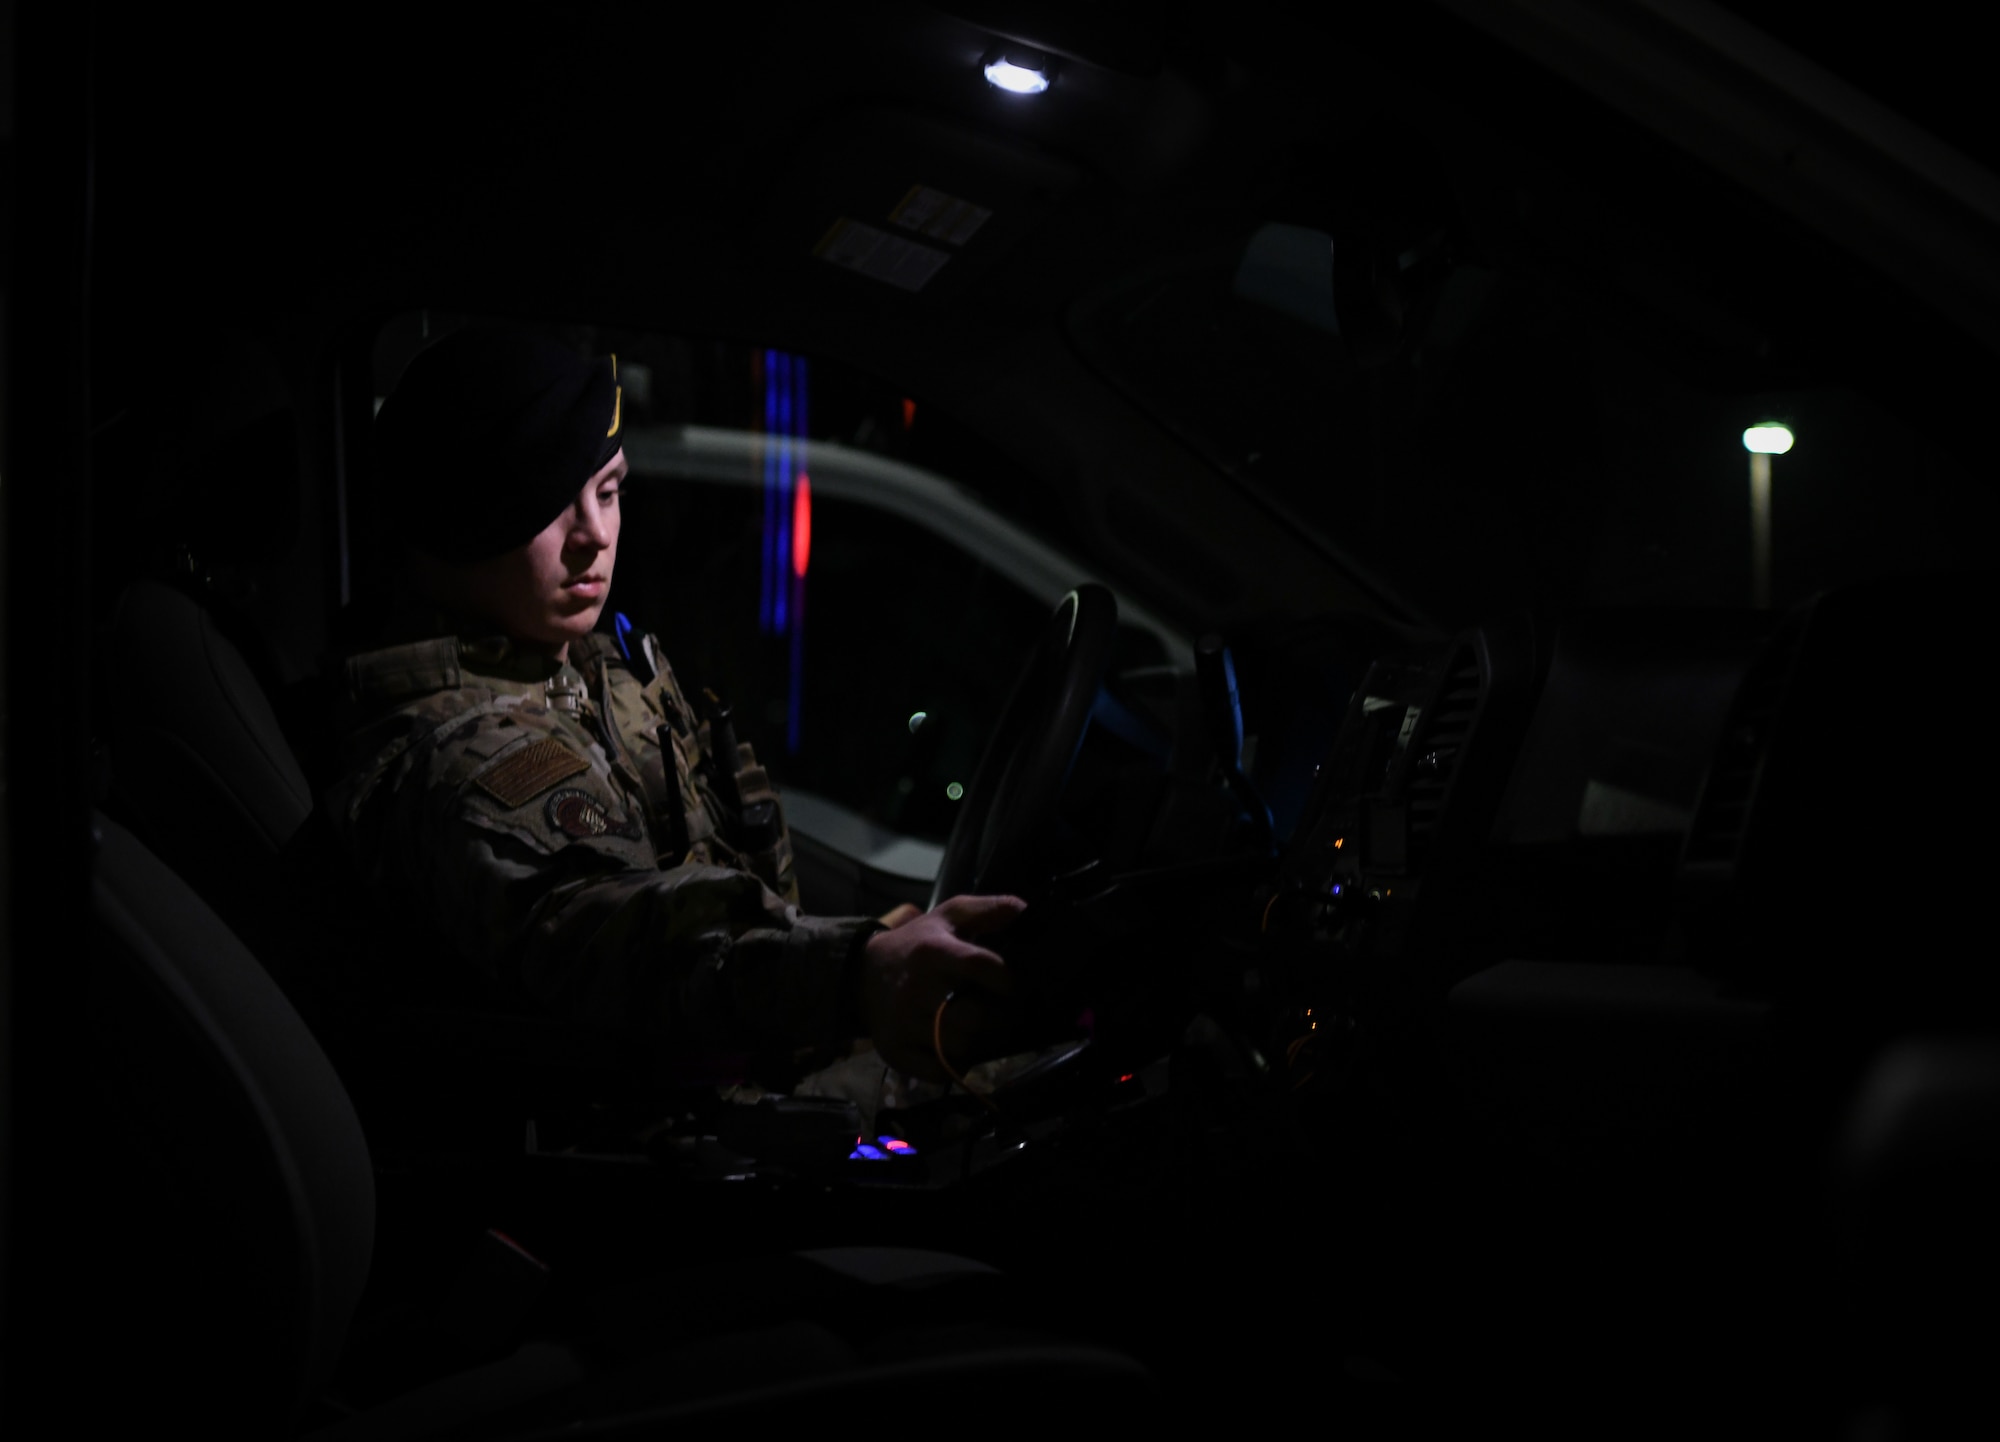 Staff Sgt. Jonathan Cornelius, Base Defense Operations Center controller assigned to the 319th Security Forces Squadron, conducts a shift change-over in a patrol vehicle on Grand Forks Air Force Base, N.D., Sep. 23, 2021. Security Forces Airmen operate 24/7 to keep the Air Force’s intelligence and surveillance assets secure. (U.S. Air Force photo by Airman 1st Class Jack LeGrand)